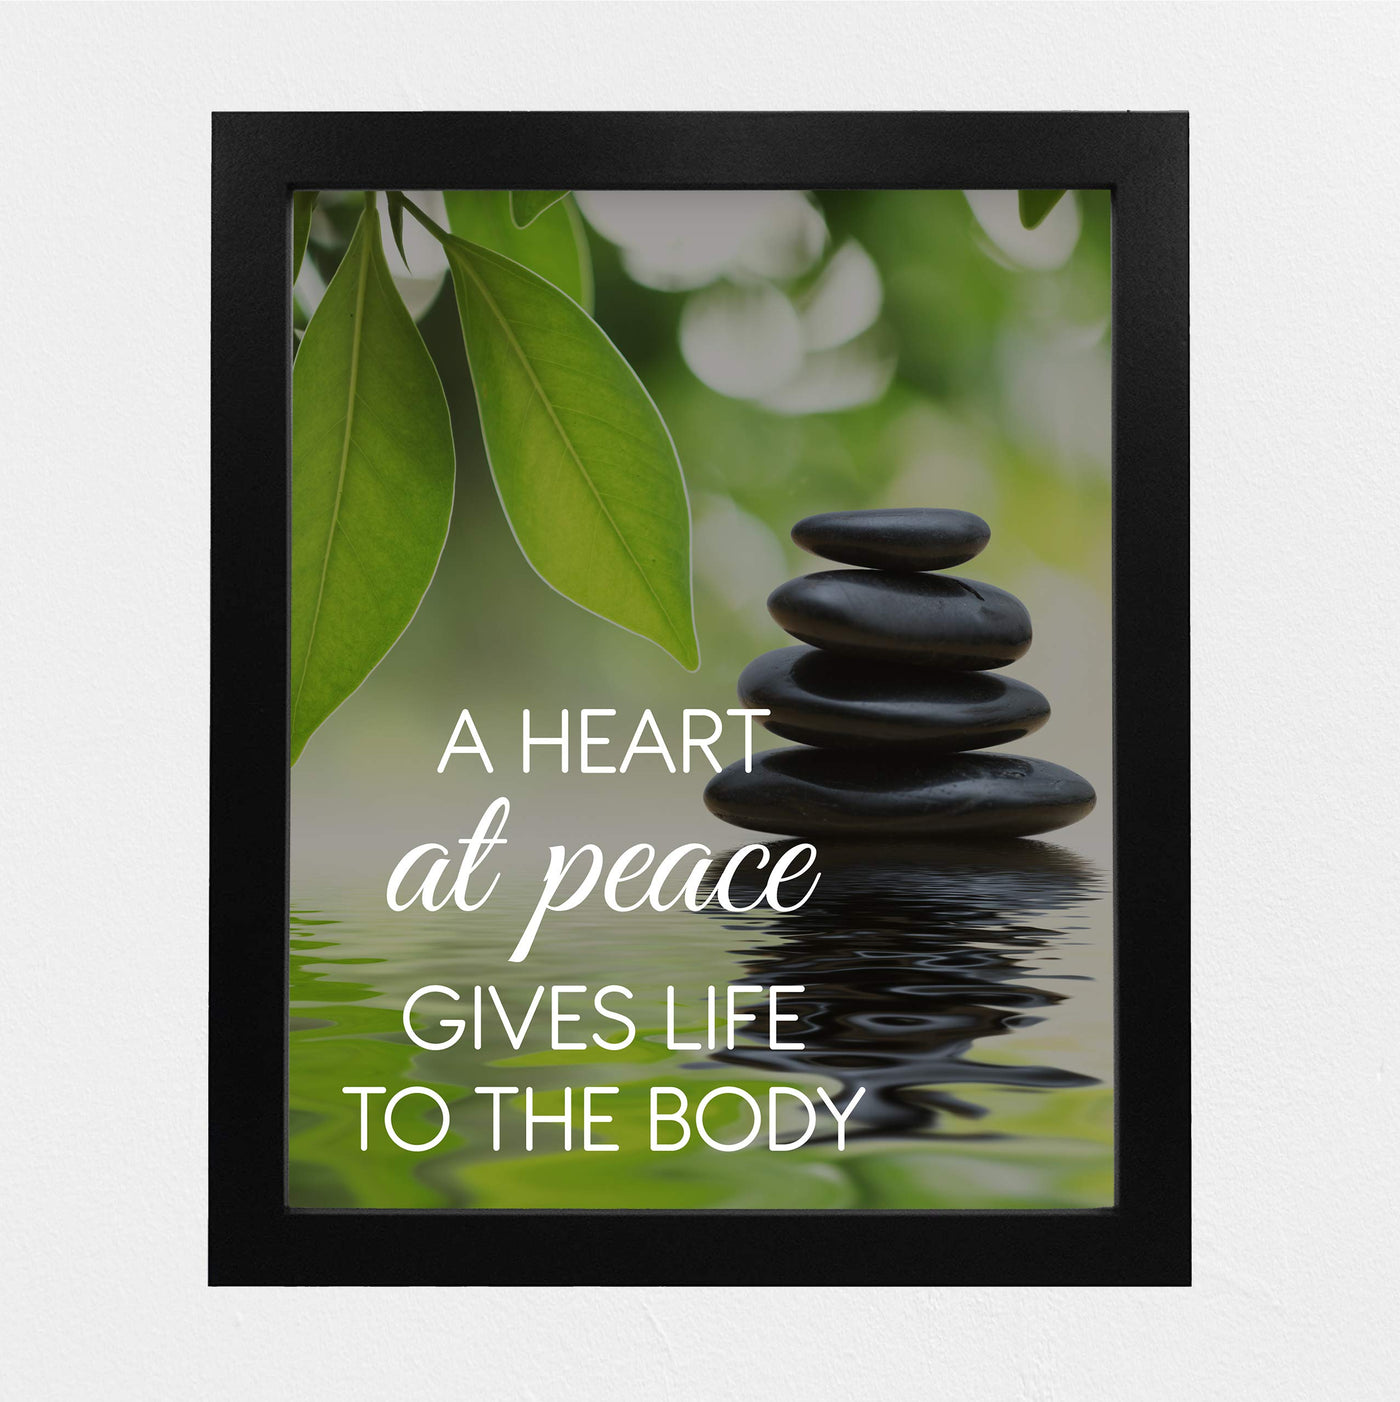 A Heart at Peace Gives Life to the Body Spiritual Quotes Wall Art-8 x 10" Peaceful Waters Photo Print-Ready to Frame. Modern Typographic Design. Home-Office-Yoga Studio-Dorm Decor! Great Zen Gift!